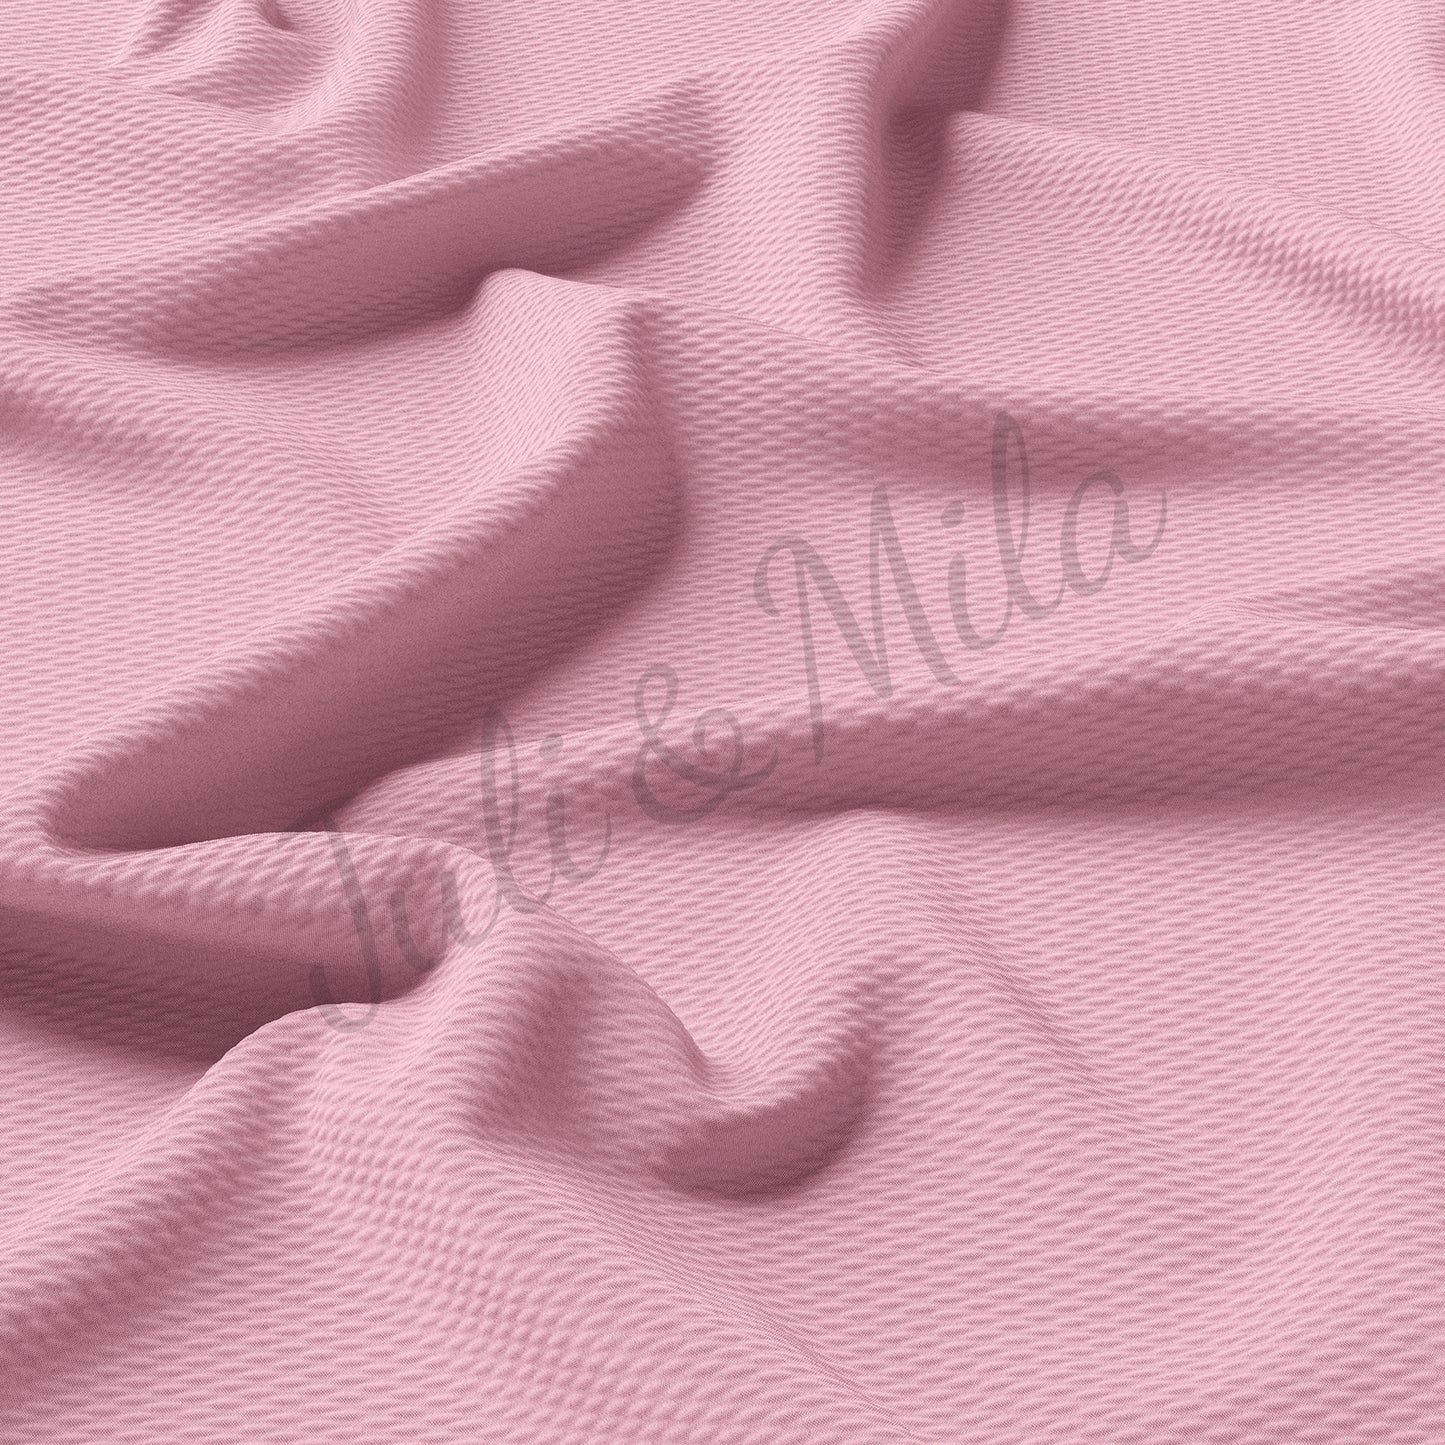 Powder Pink Liverpool Bullet Textured Fabric